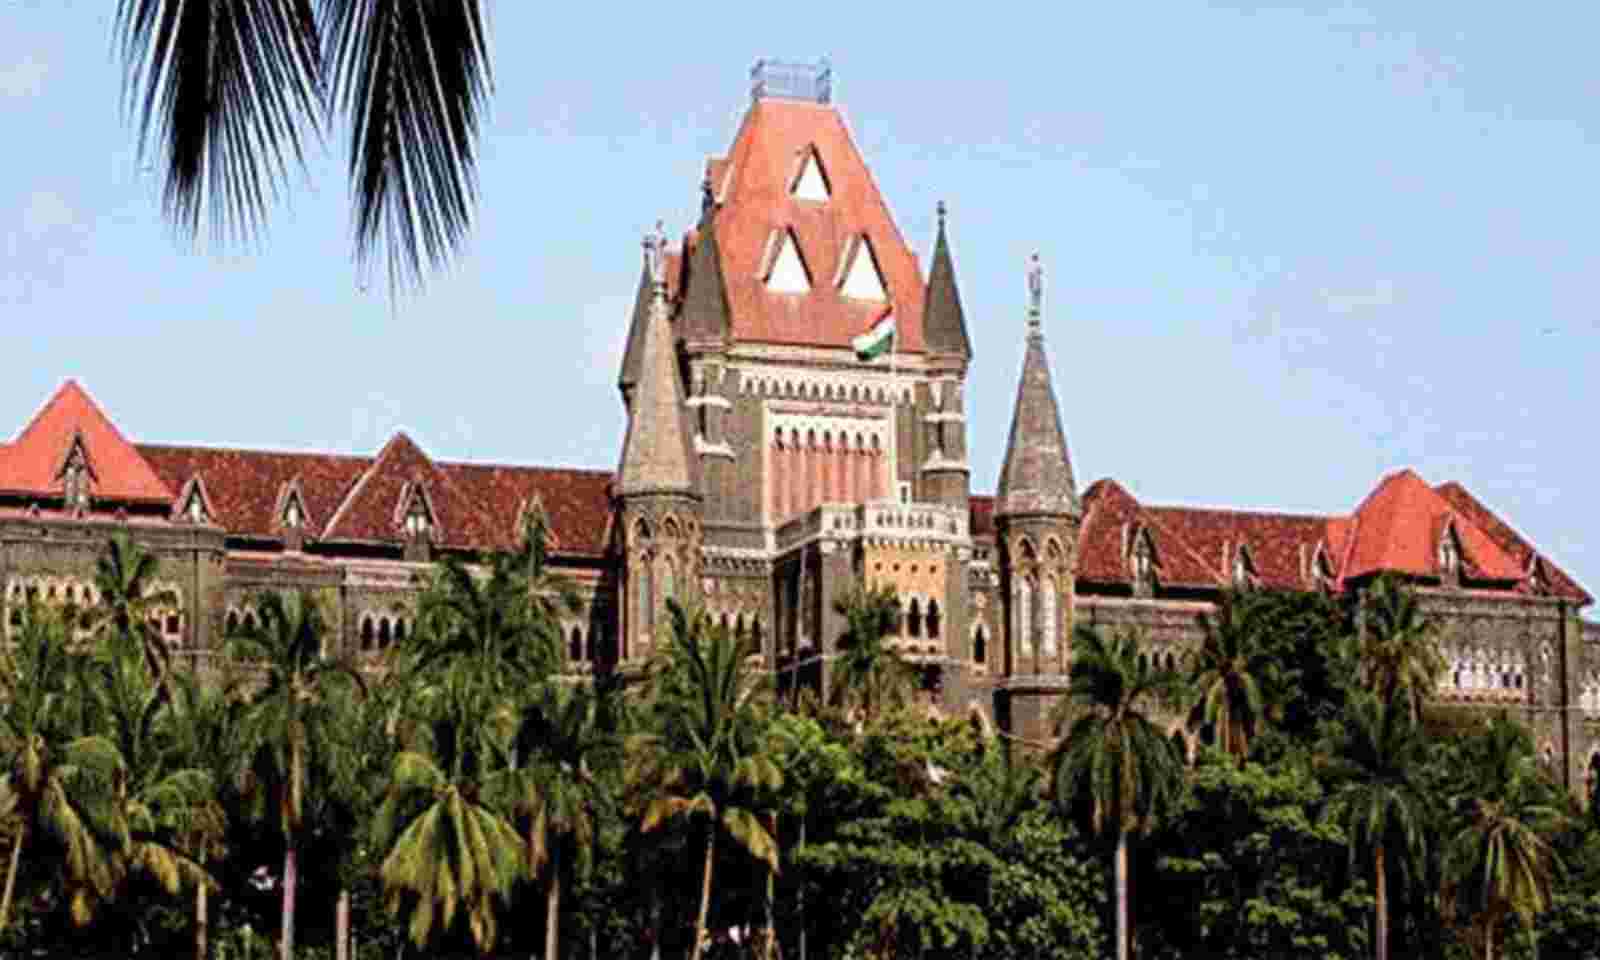 Shareholders Of RCFL Permitted To Carry Out A Voting Process Based On Debenture Trust Deeds In Compliance With RBI Circular: Bombay High Court Dismisses SEBIs Appeal